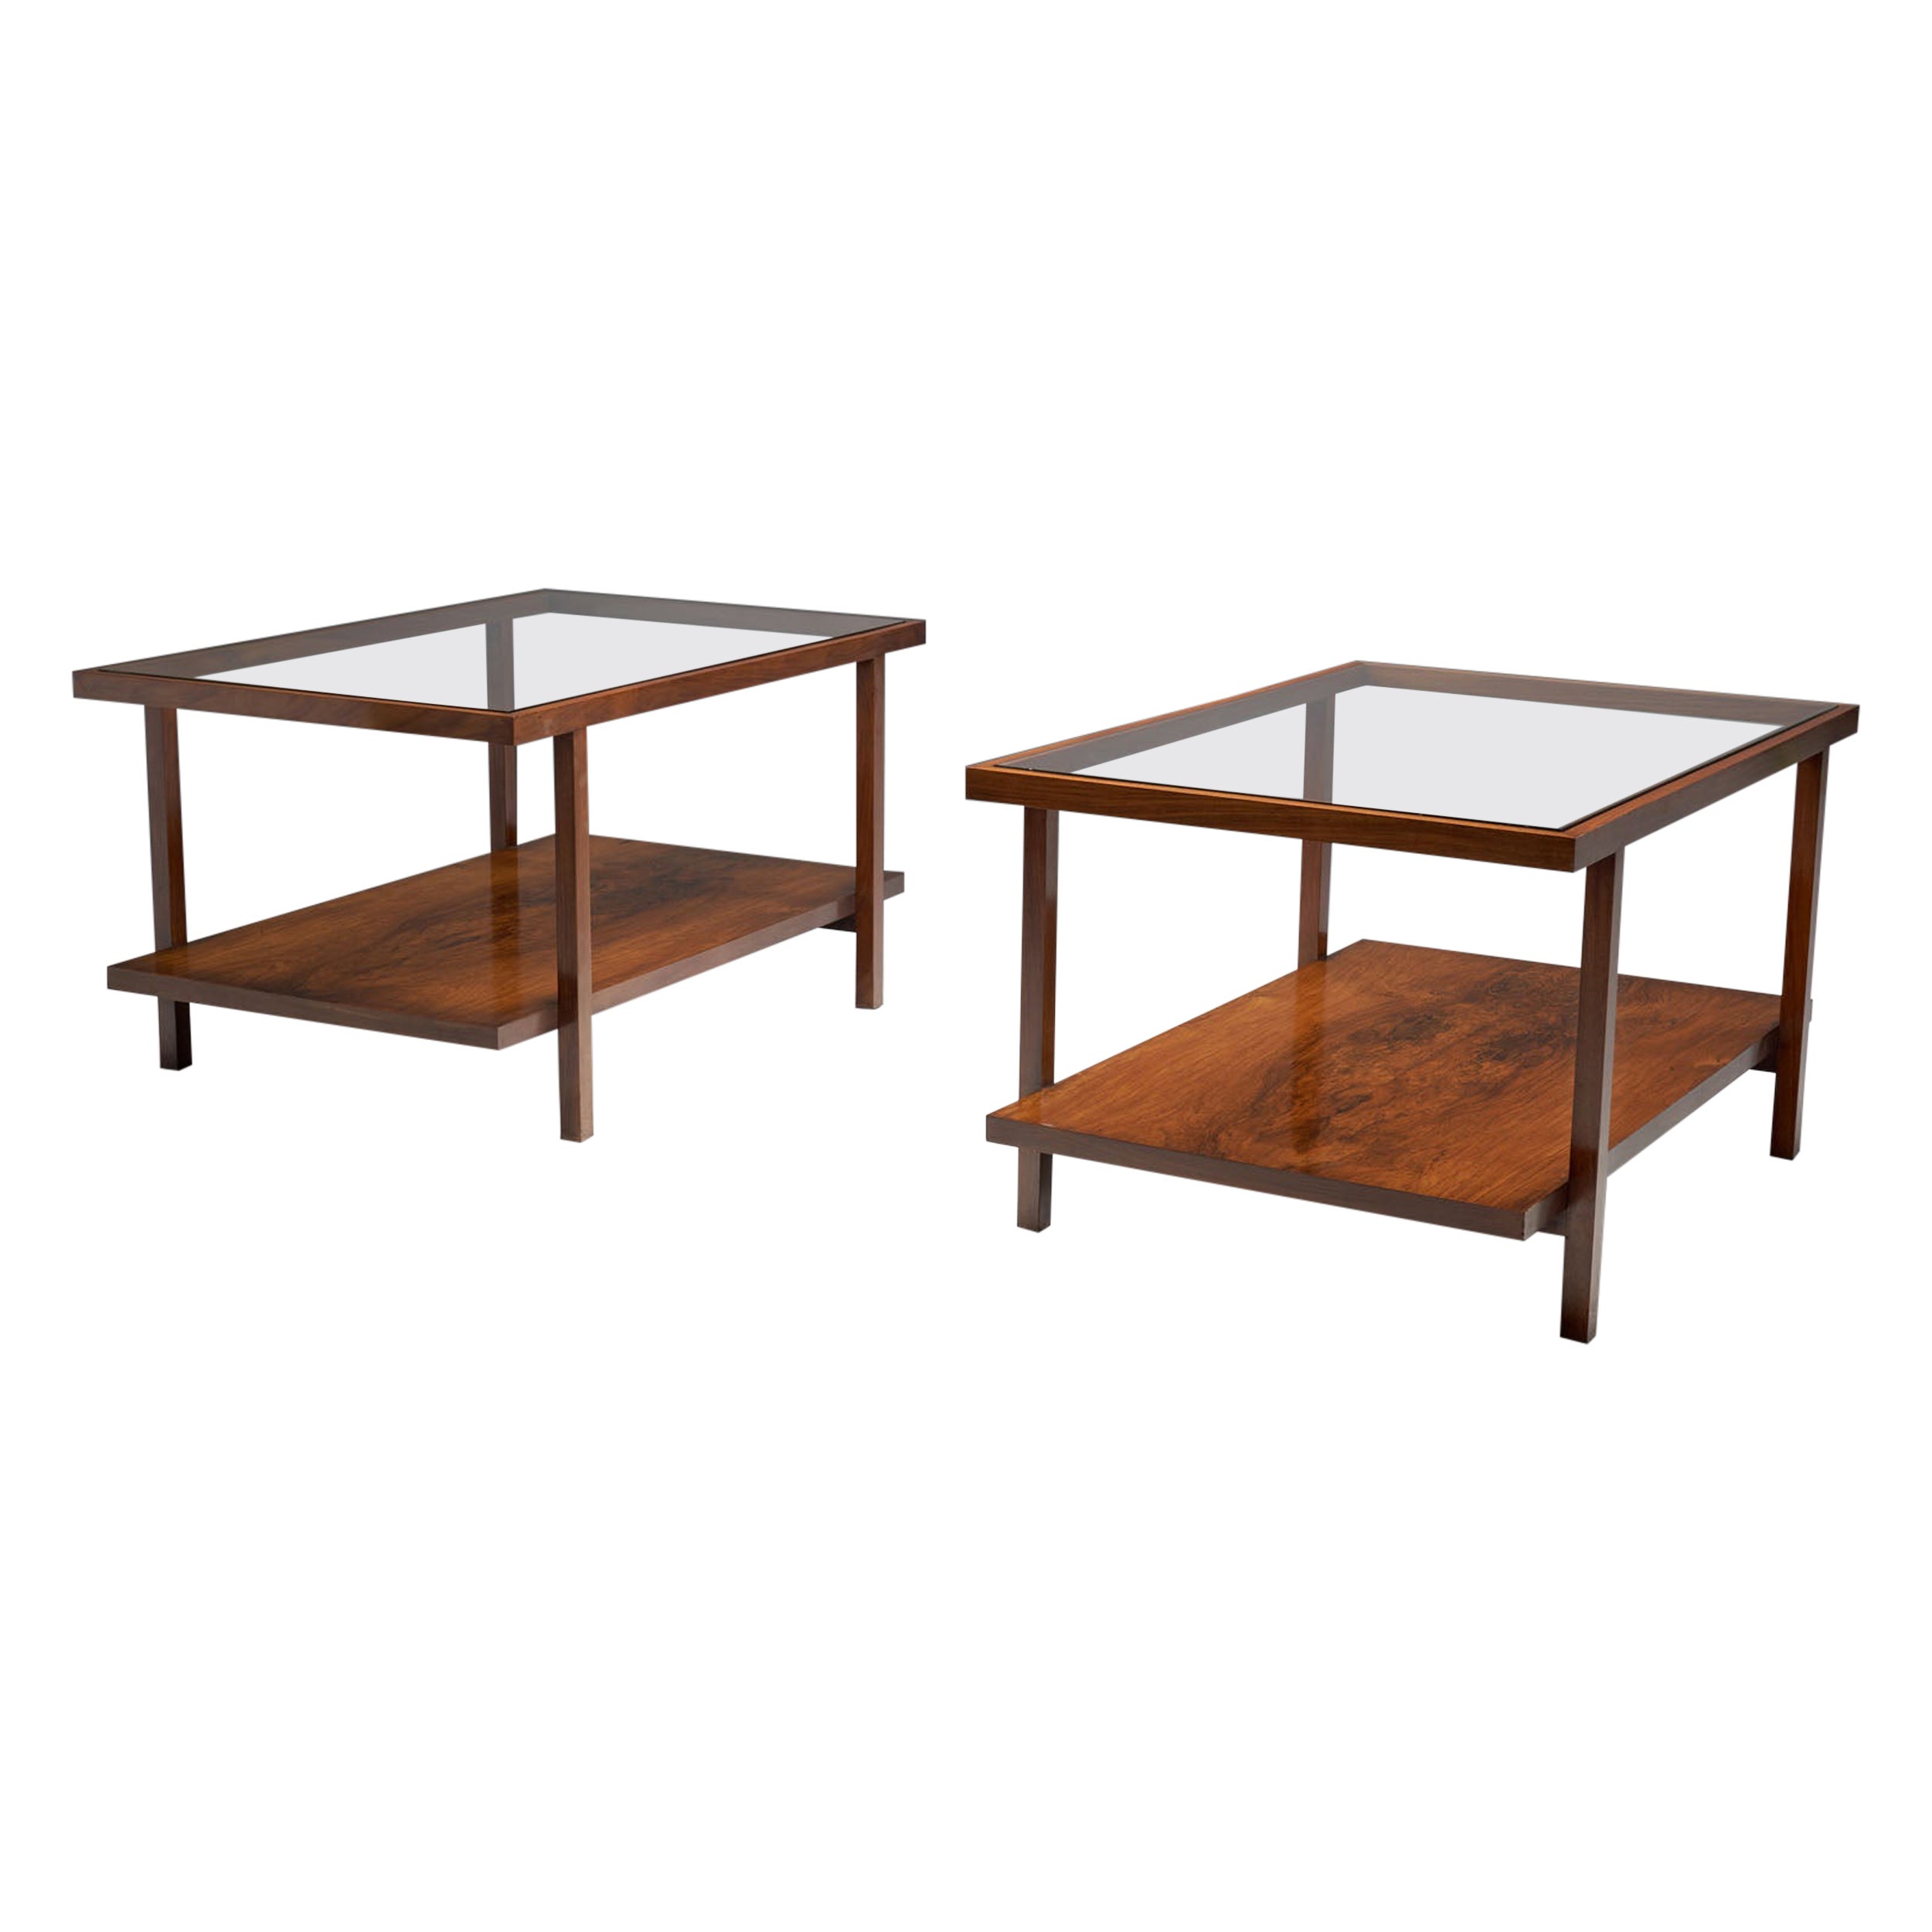 A Pair of Rectangular Branco and Preto Side Tables in Caviuna Wood, Brazil 1960s